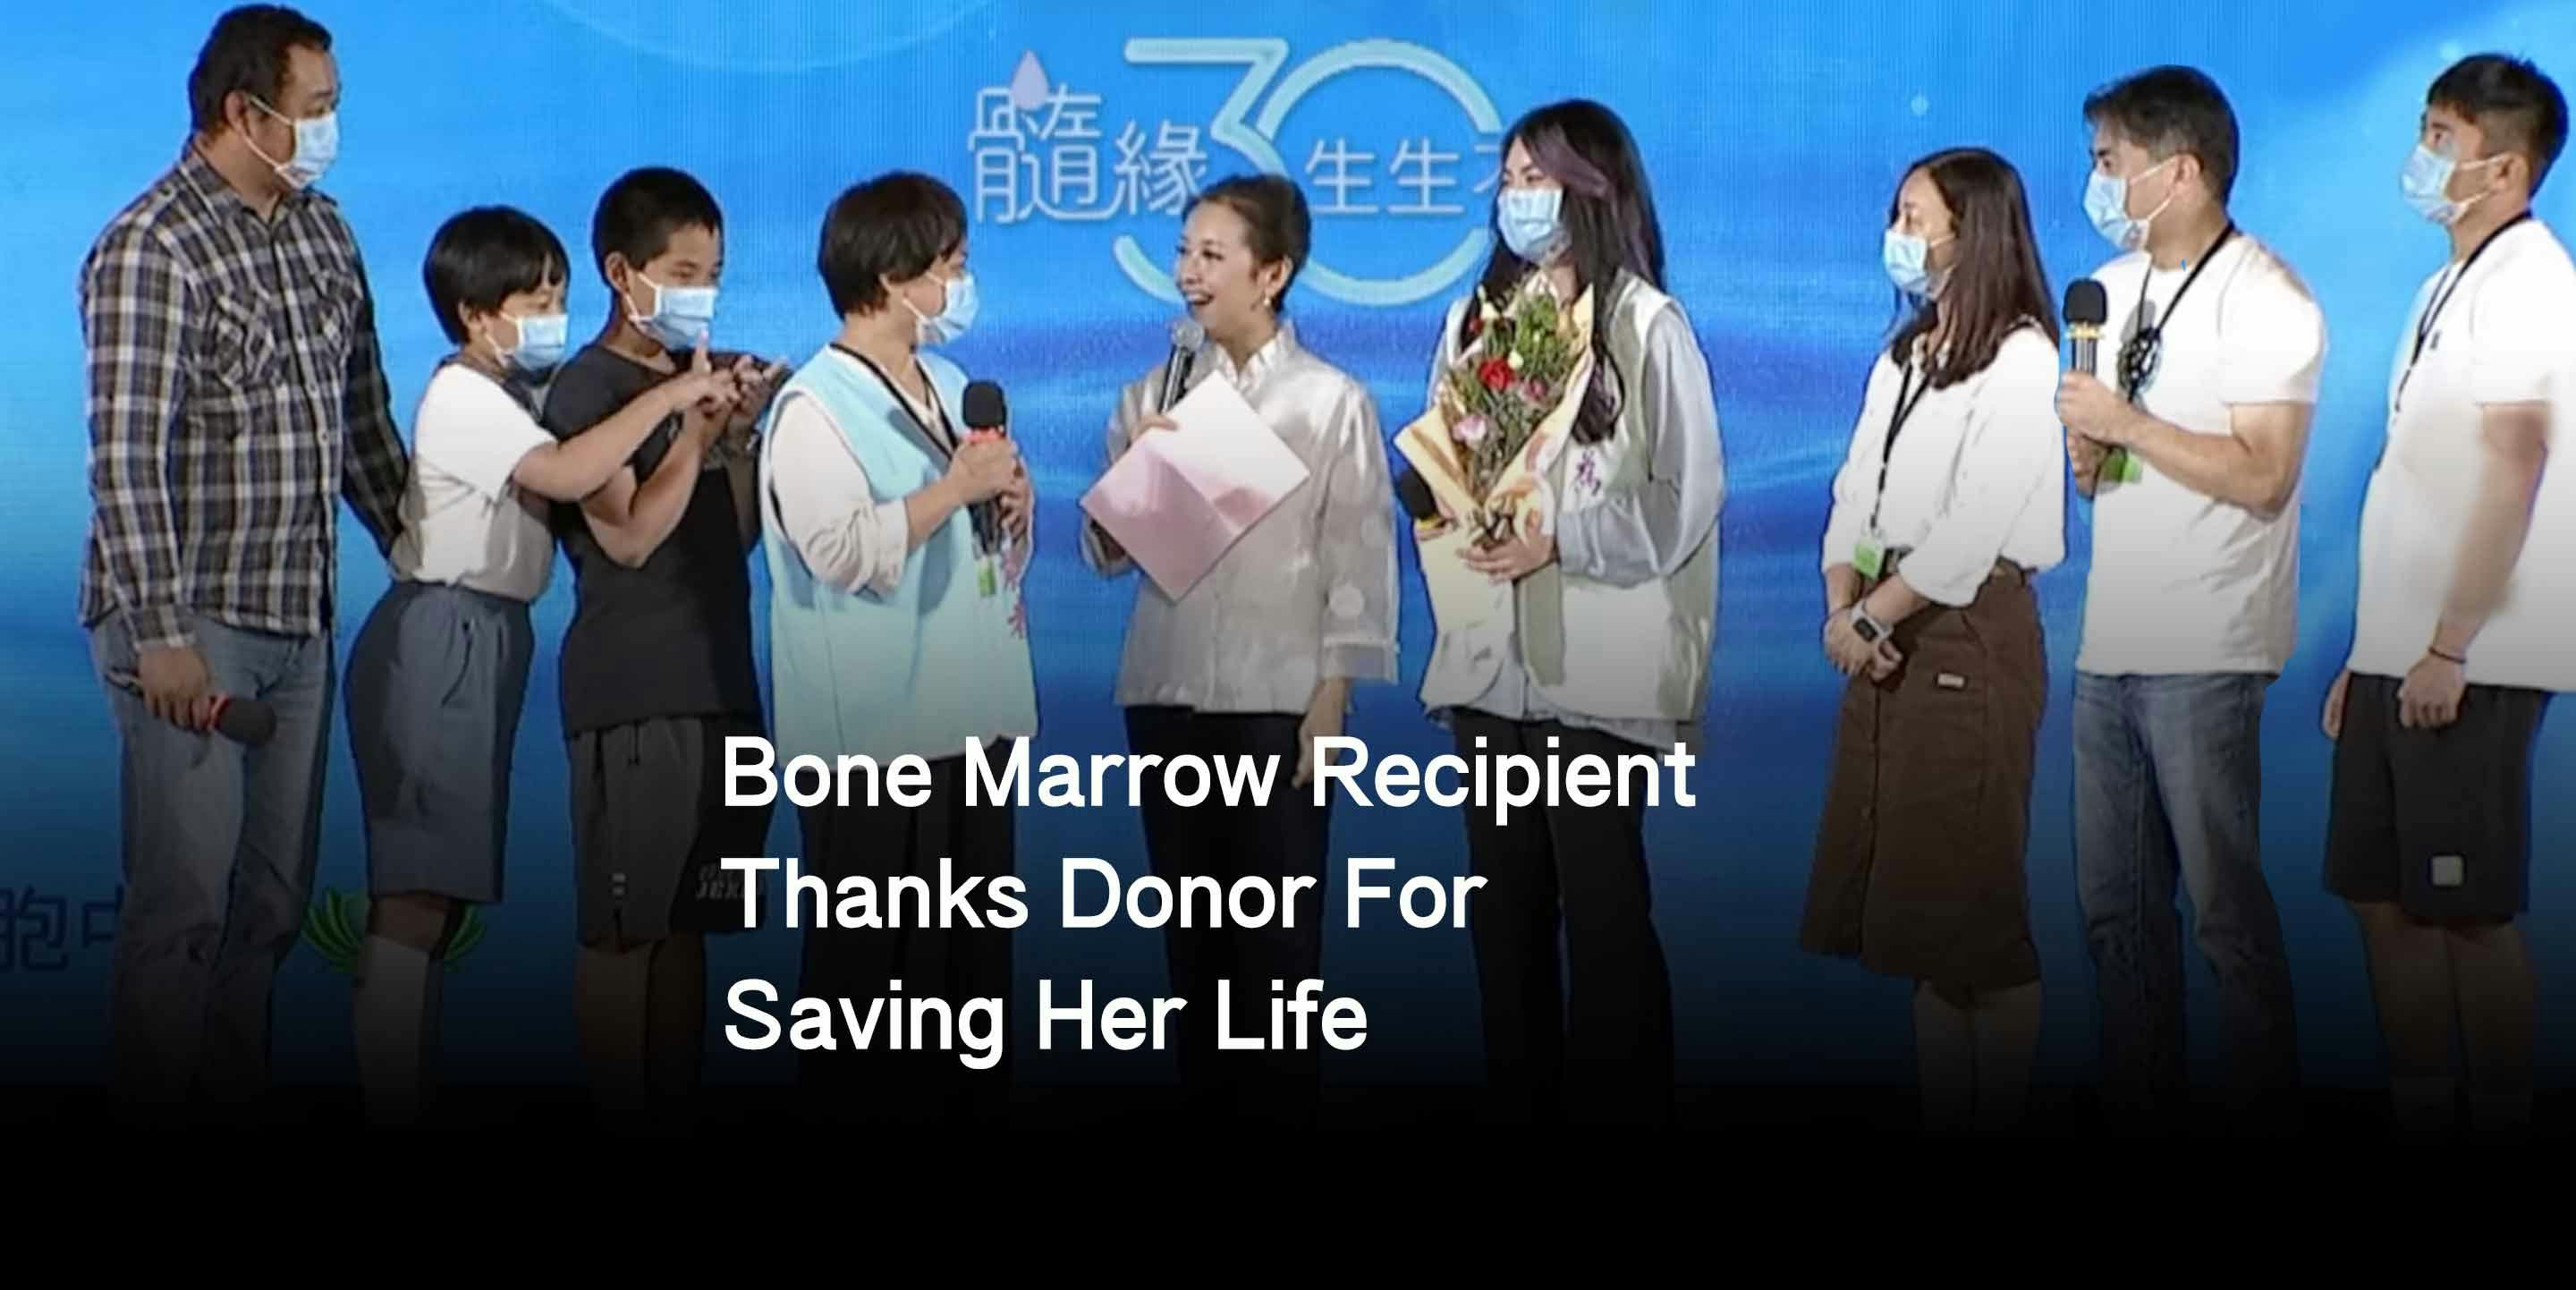 Bone Marrow Recipient Thanks Donor For Saving Her Life